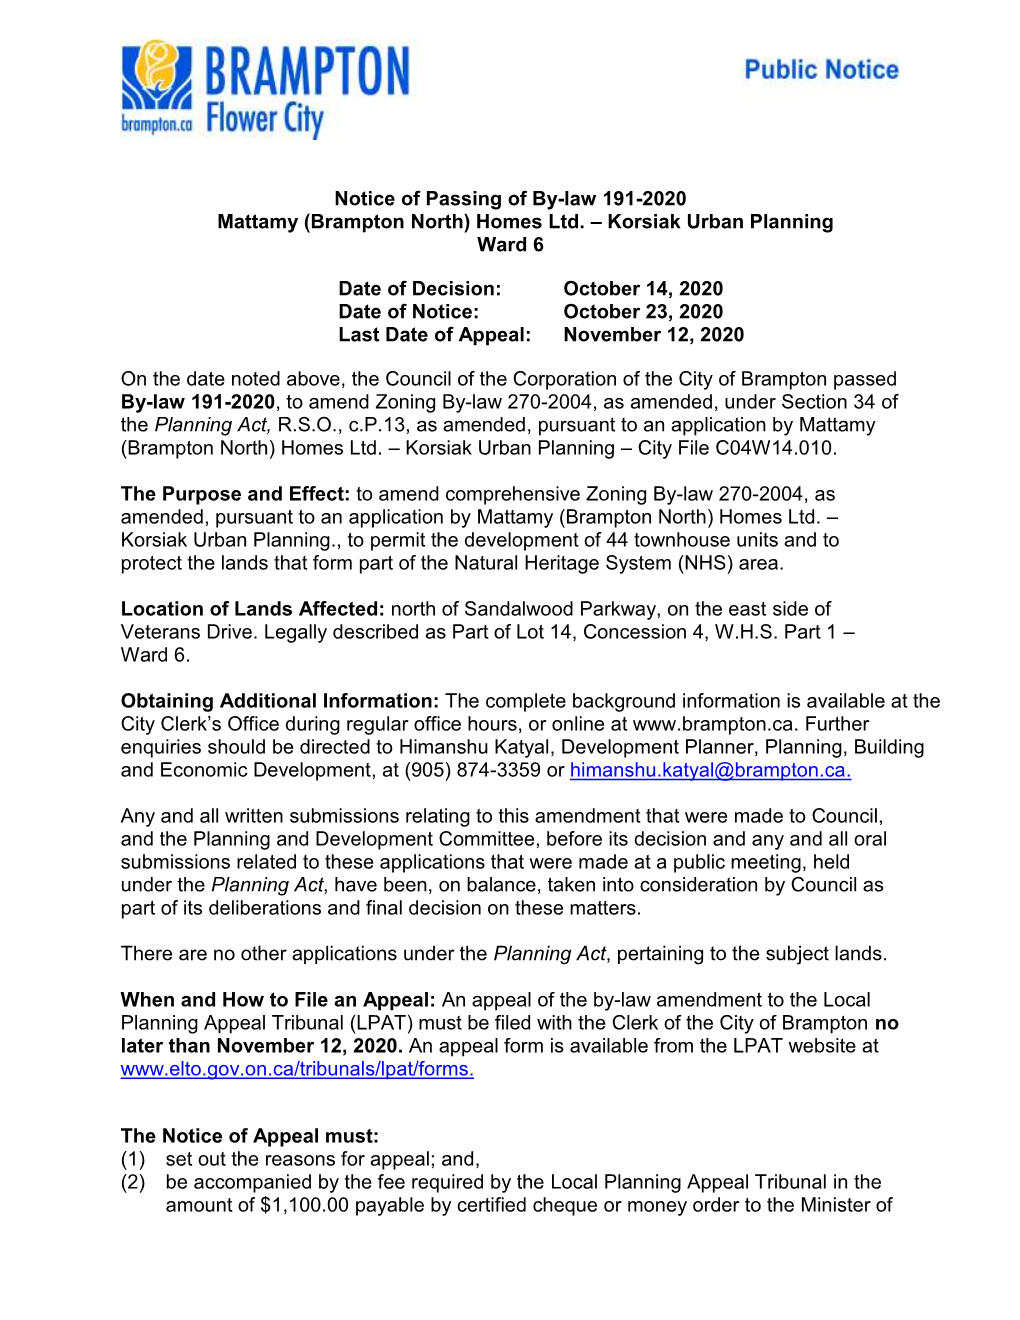 Notice of Passing of By-Law 191-2020 Mattamy (Brampton North) Homes Ltd